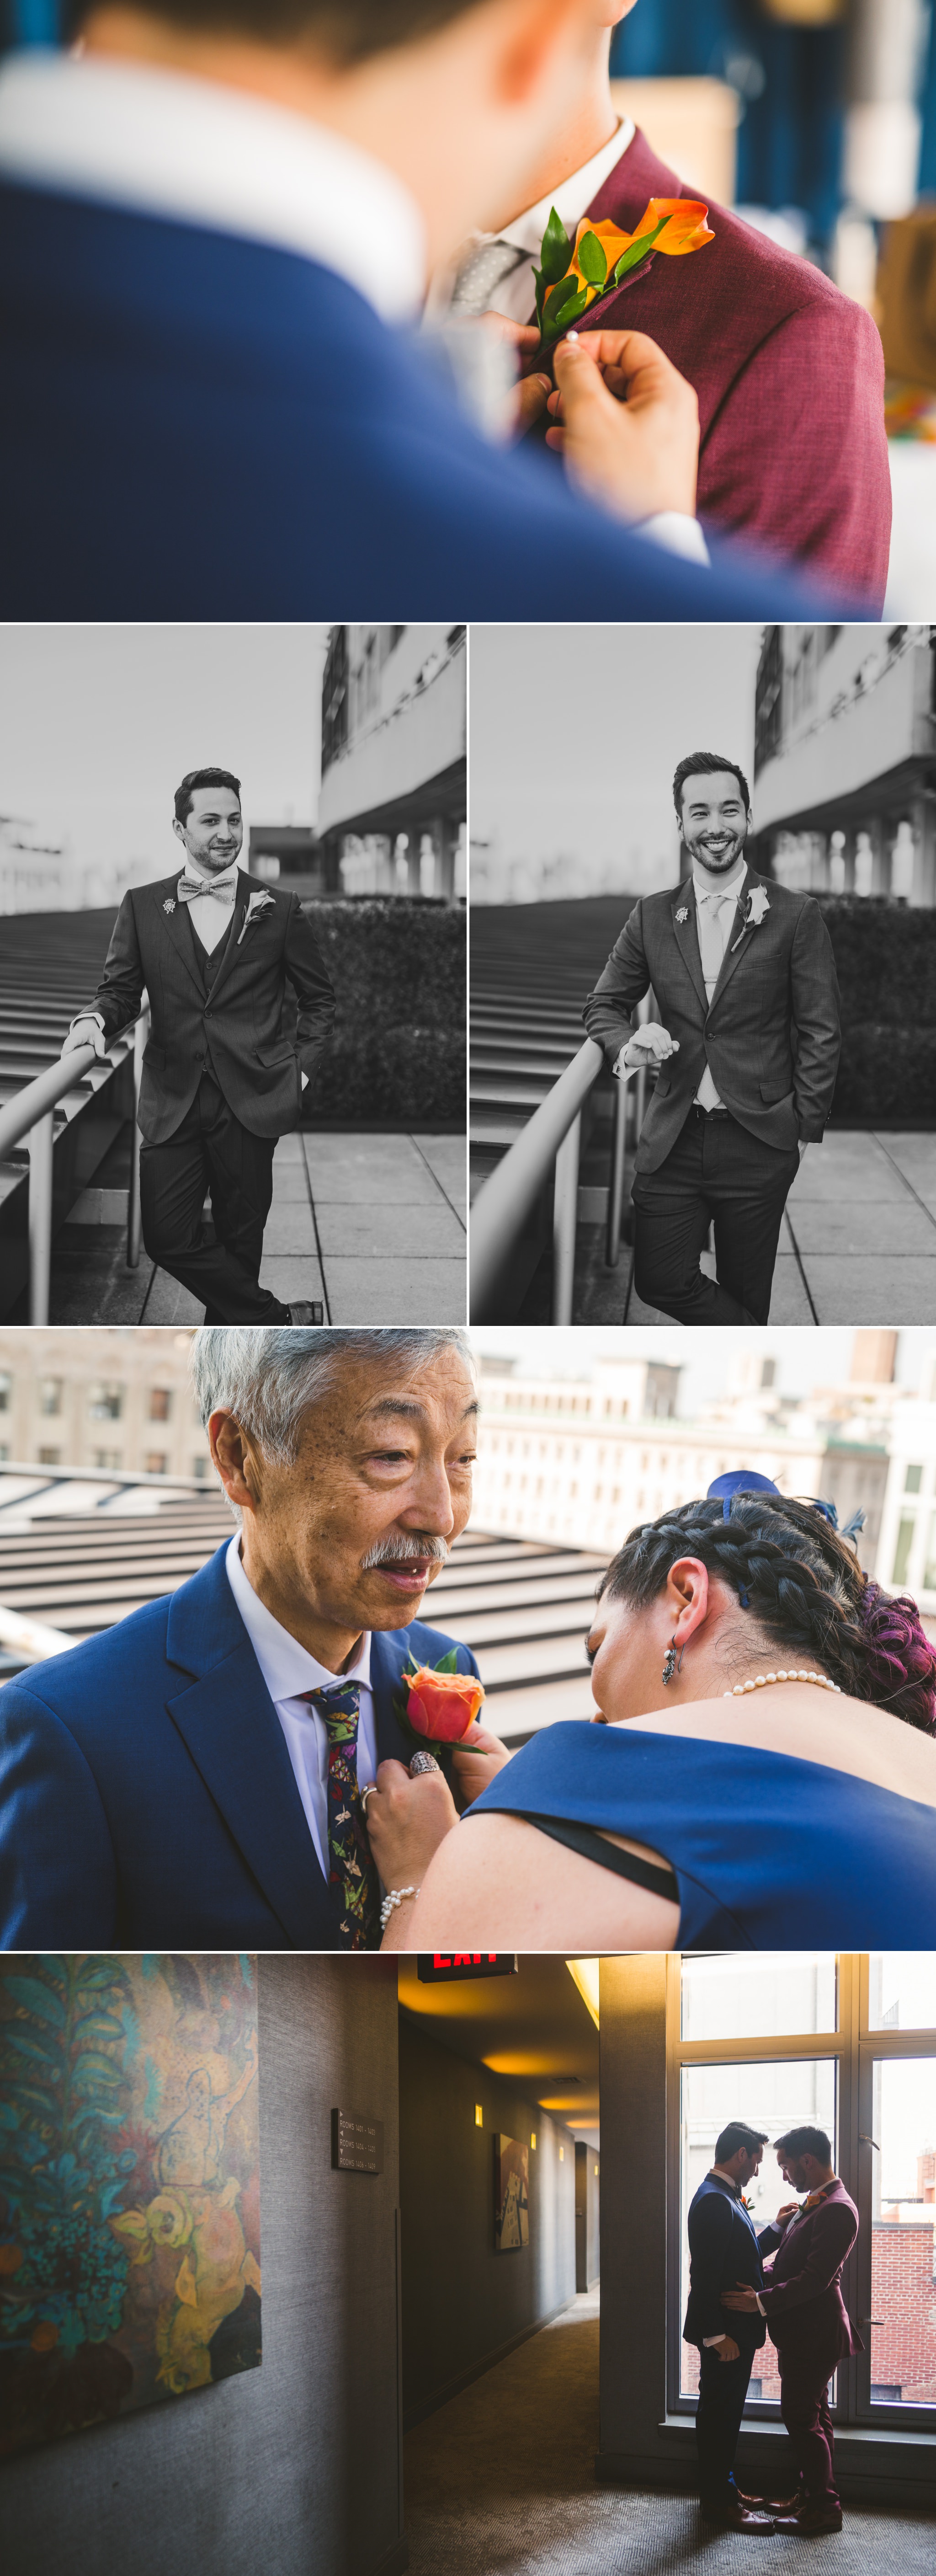  Final touches before their wedding. While they didn't do a first look, there were a lot of small moments of putting on flowers that I wanted to capture. 

Photographs from Keiji and Michael's Manhattan, New York wedding at the Arthouse Hotel and the